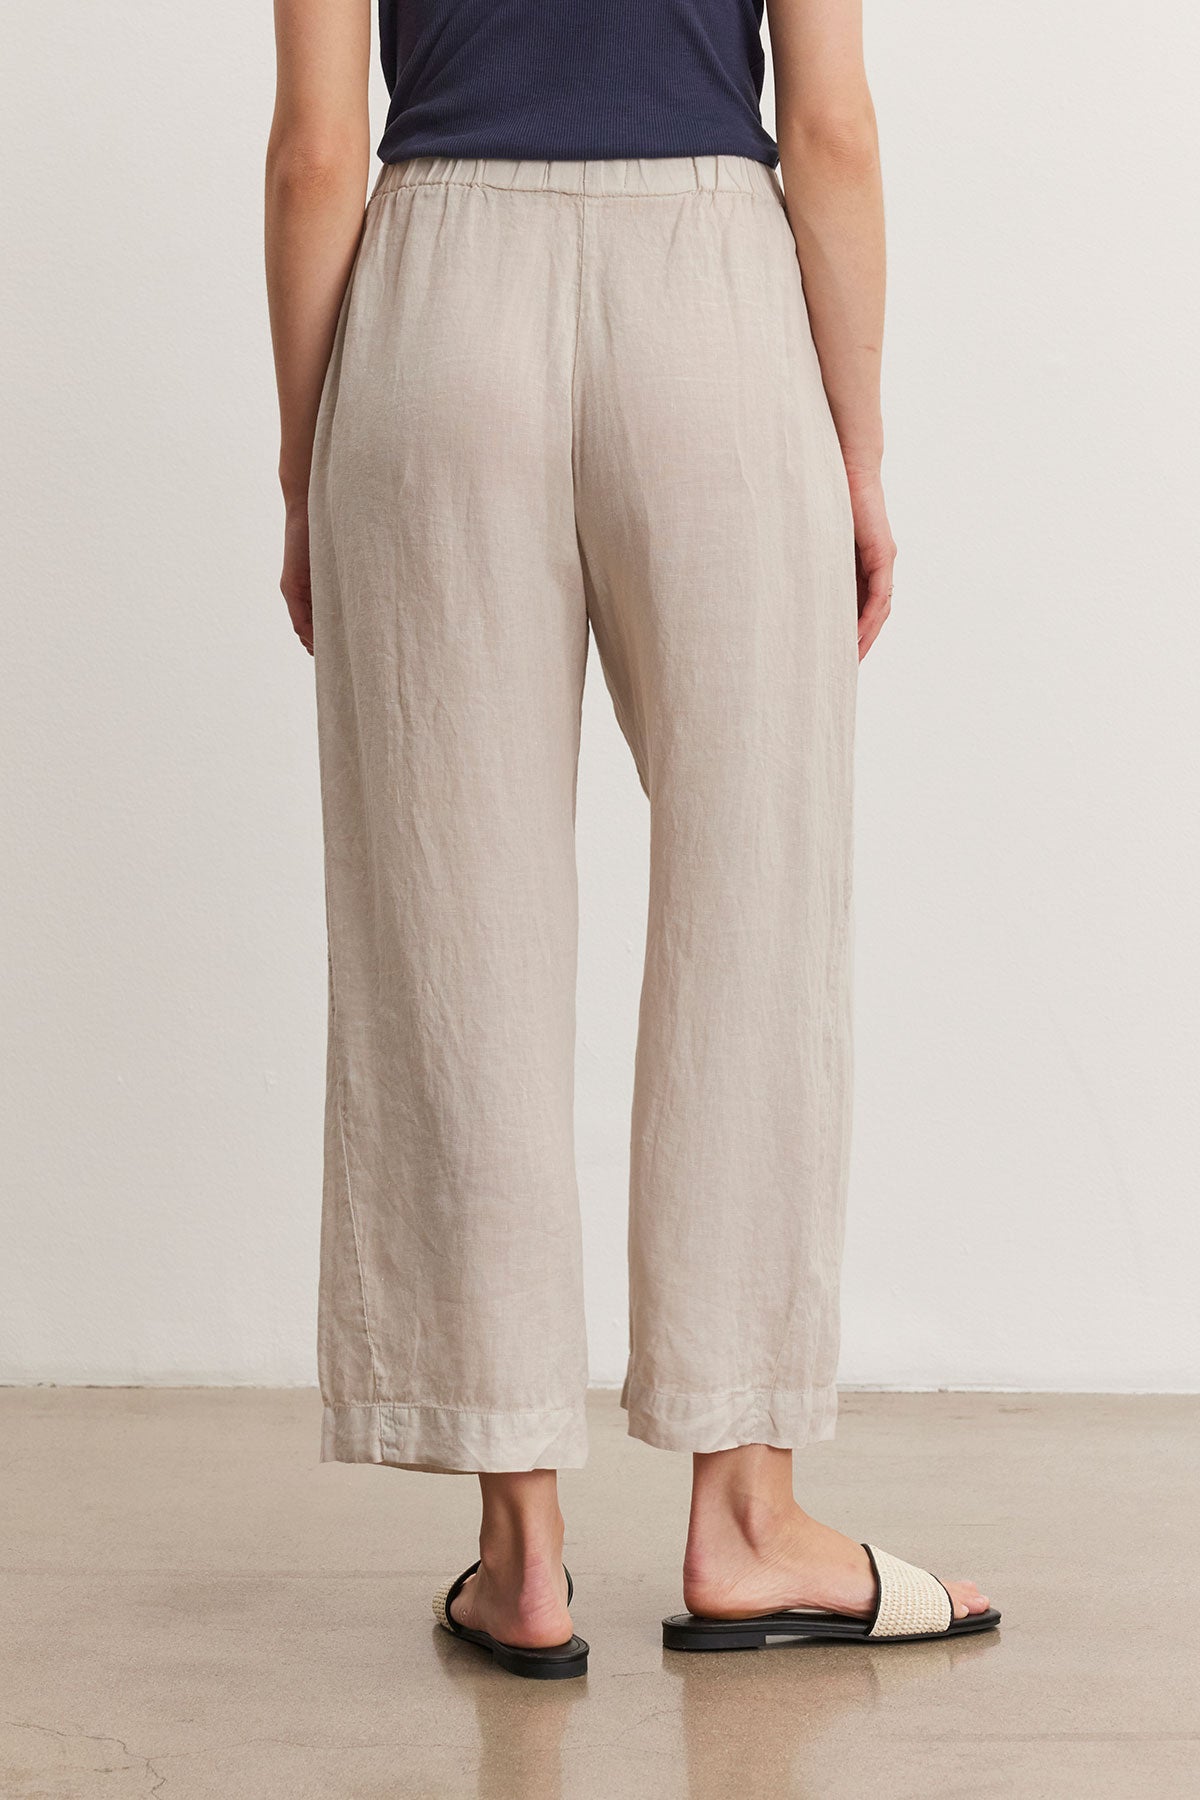 A person is standing on a polished floor, wearing beige LOLA LINEN PANT by Velvet by Graham & Spencer with an elastic waist, a navy top, and straw sandals. The photo is taken from behind.-36998848446657